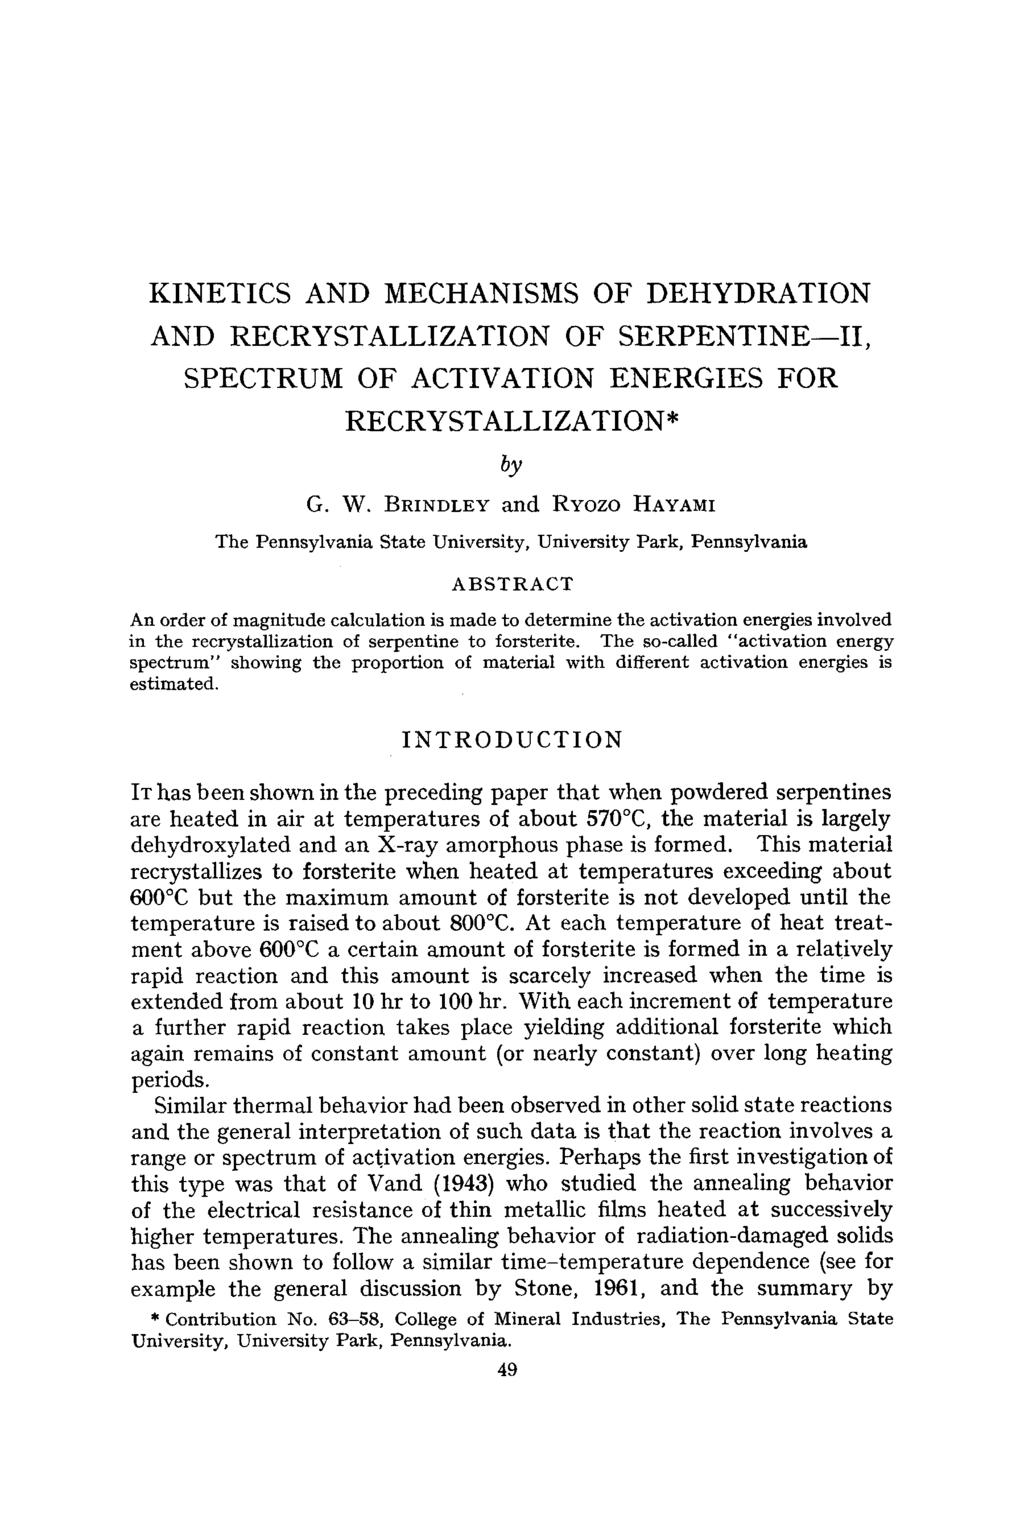 KNETCS AND MECHANSMS OF DEHYDRATON AND RECRYSTALLZATON OF SERPENTNE--, SPECTRUM OF ACTVATON ENERGES FOR RECRYSTALLZATON* by G. W.